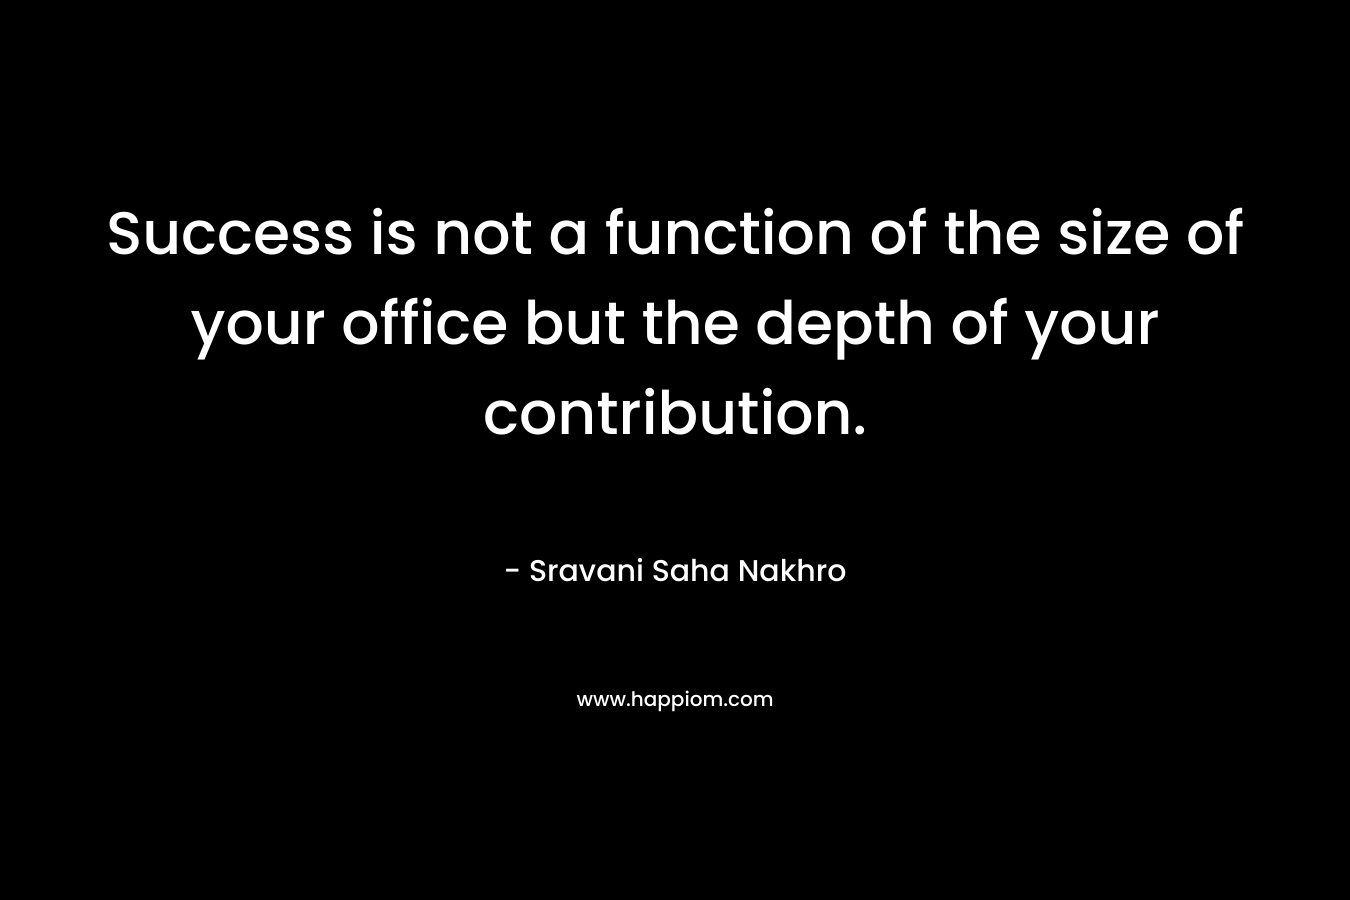 Success is not a function of the size of your office but the depth of your contribution. – Sravani Saha Nakhro